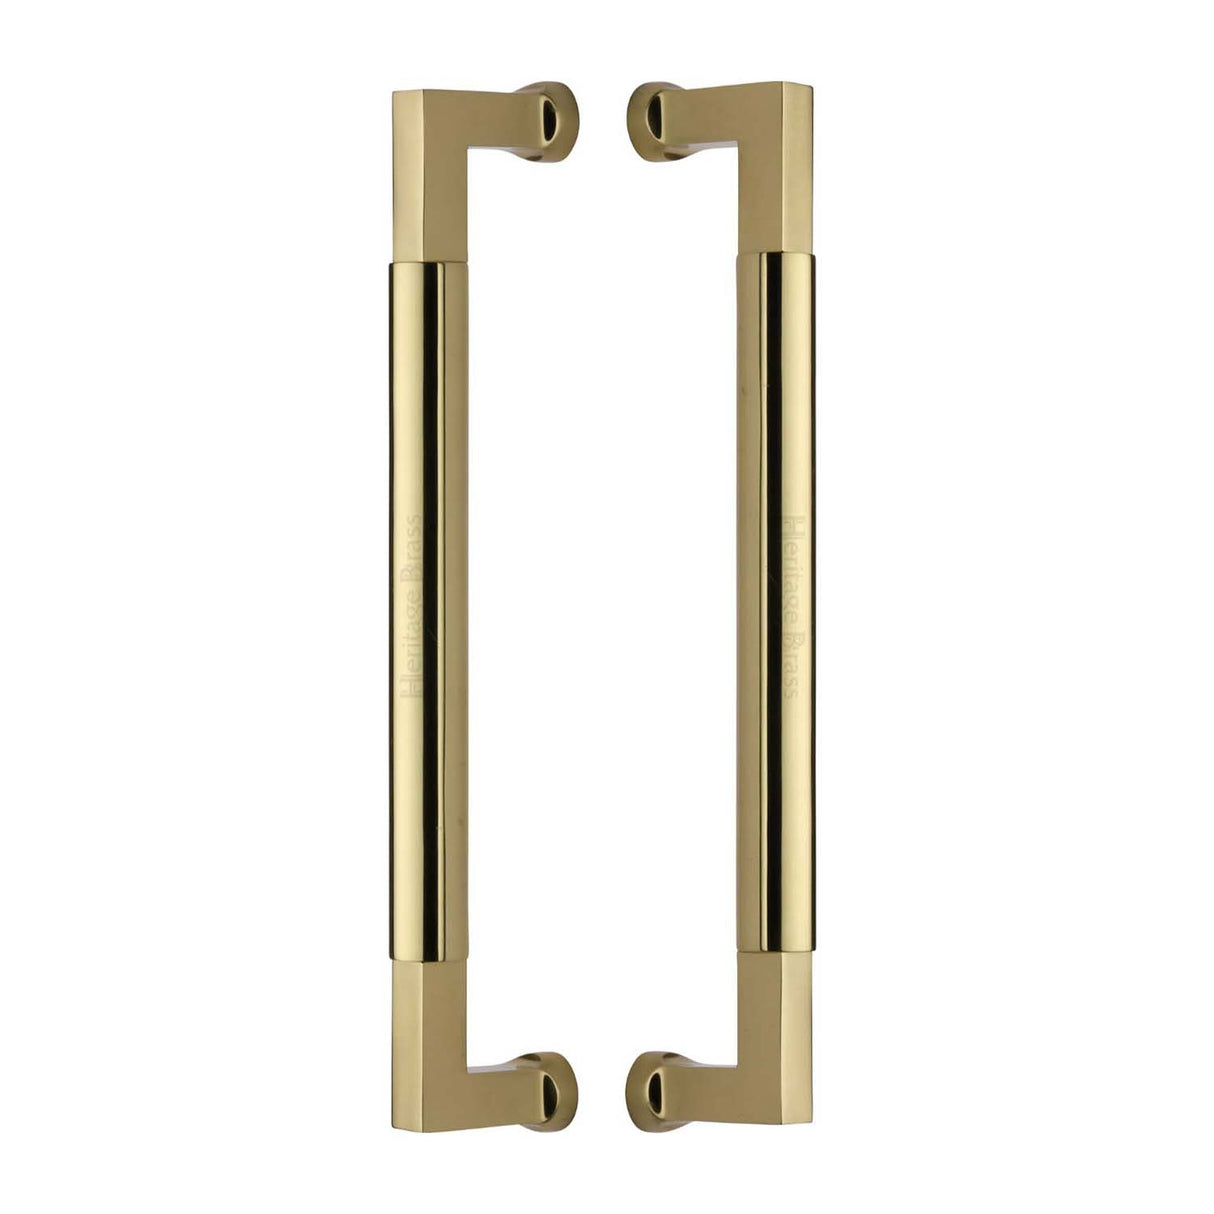 This is an image of a Heritage Brass - Door Pull Handle Bauhaus Design 330mm Polished Brass Finish, btb1312-330-pb that is available to order from Trade Door Handles in Kendal.